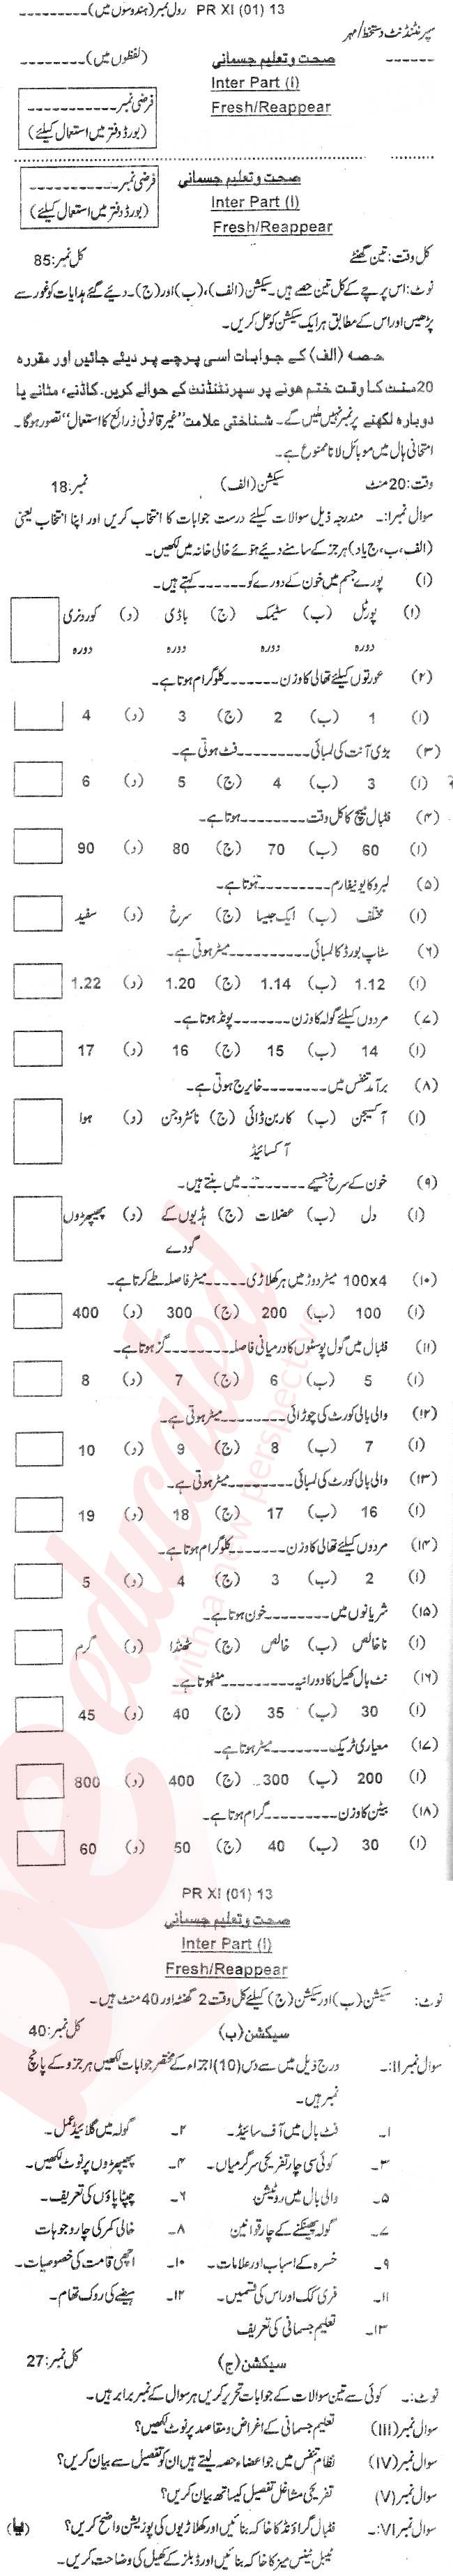 Health and Physical Education FA Part 1 Past Paper Group 1 BISE Abbottabad 2013